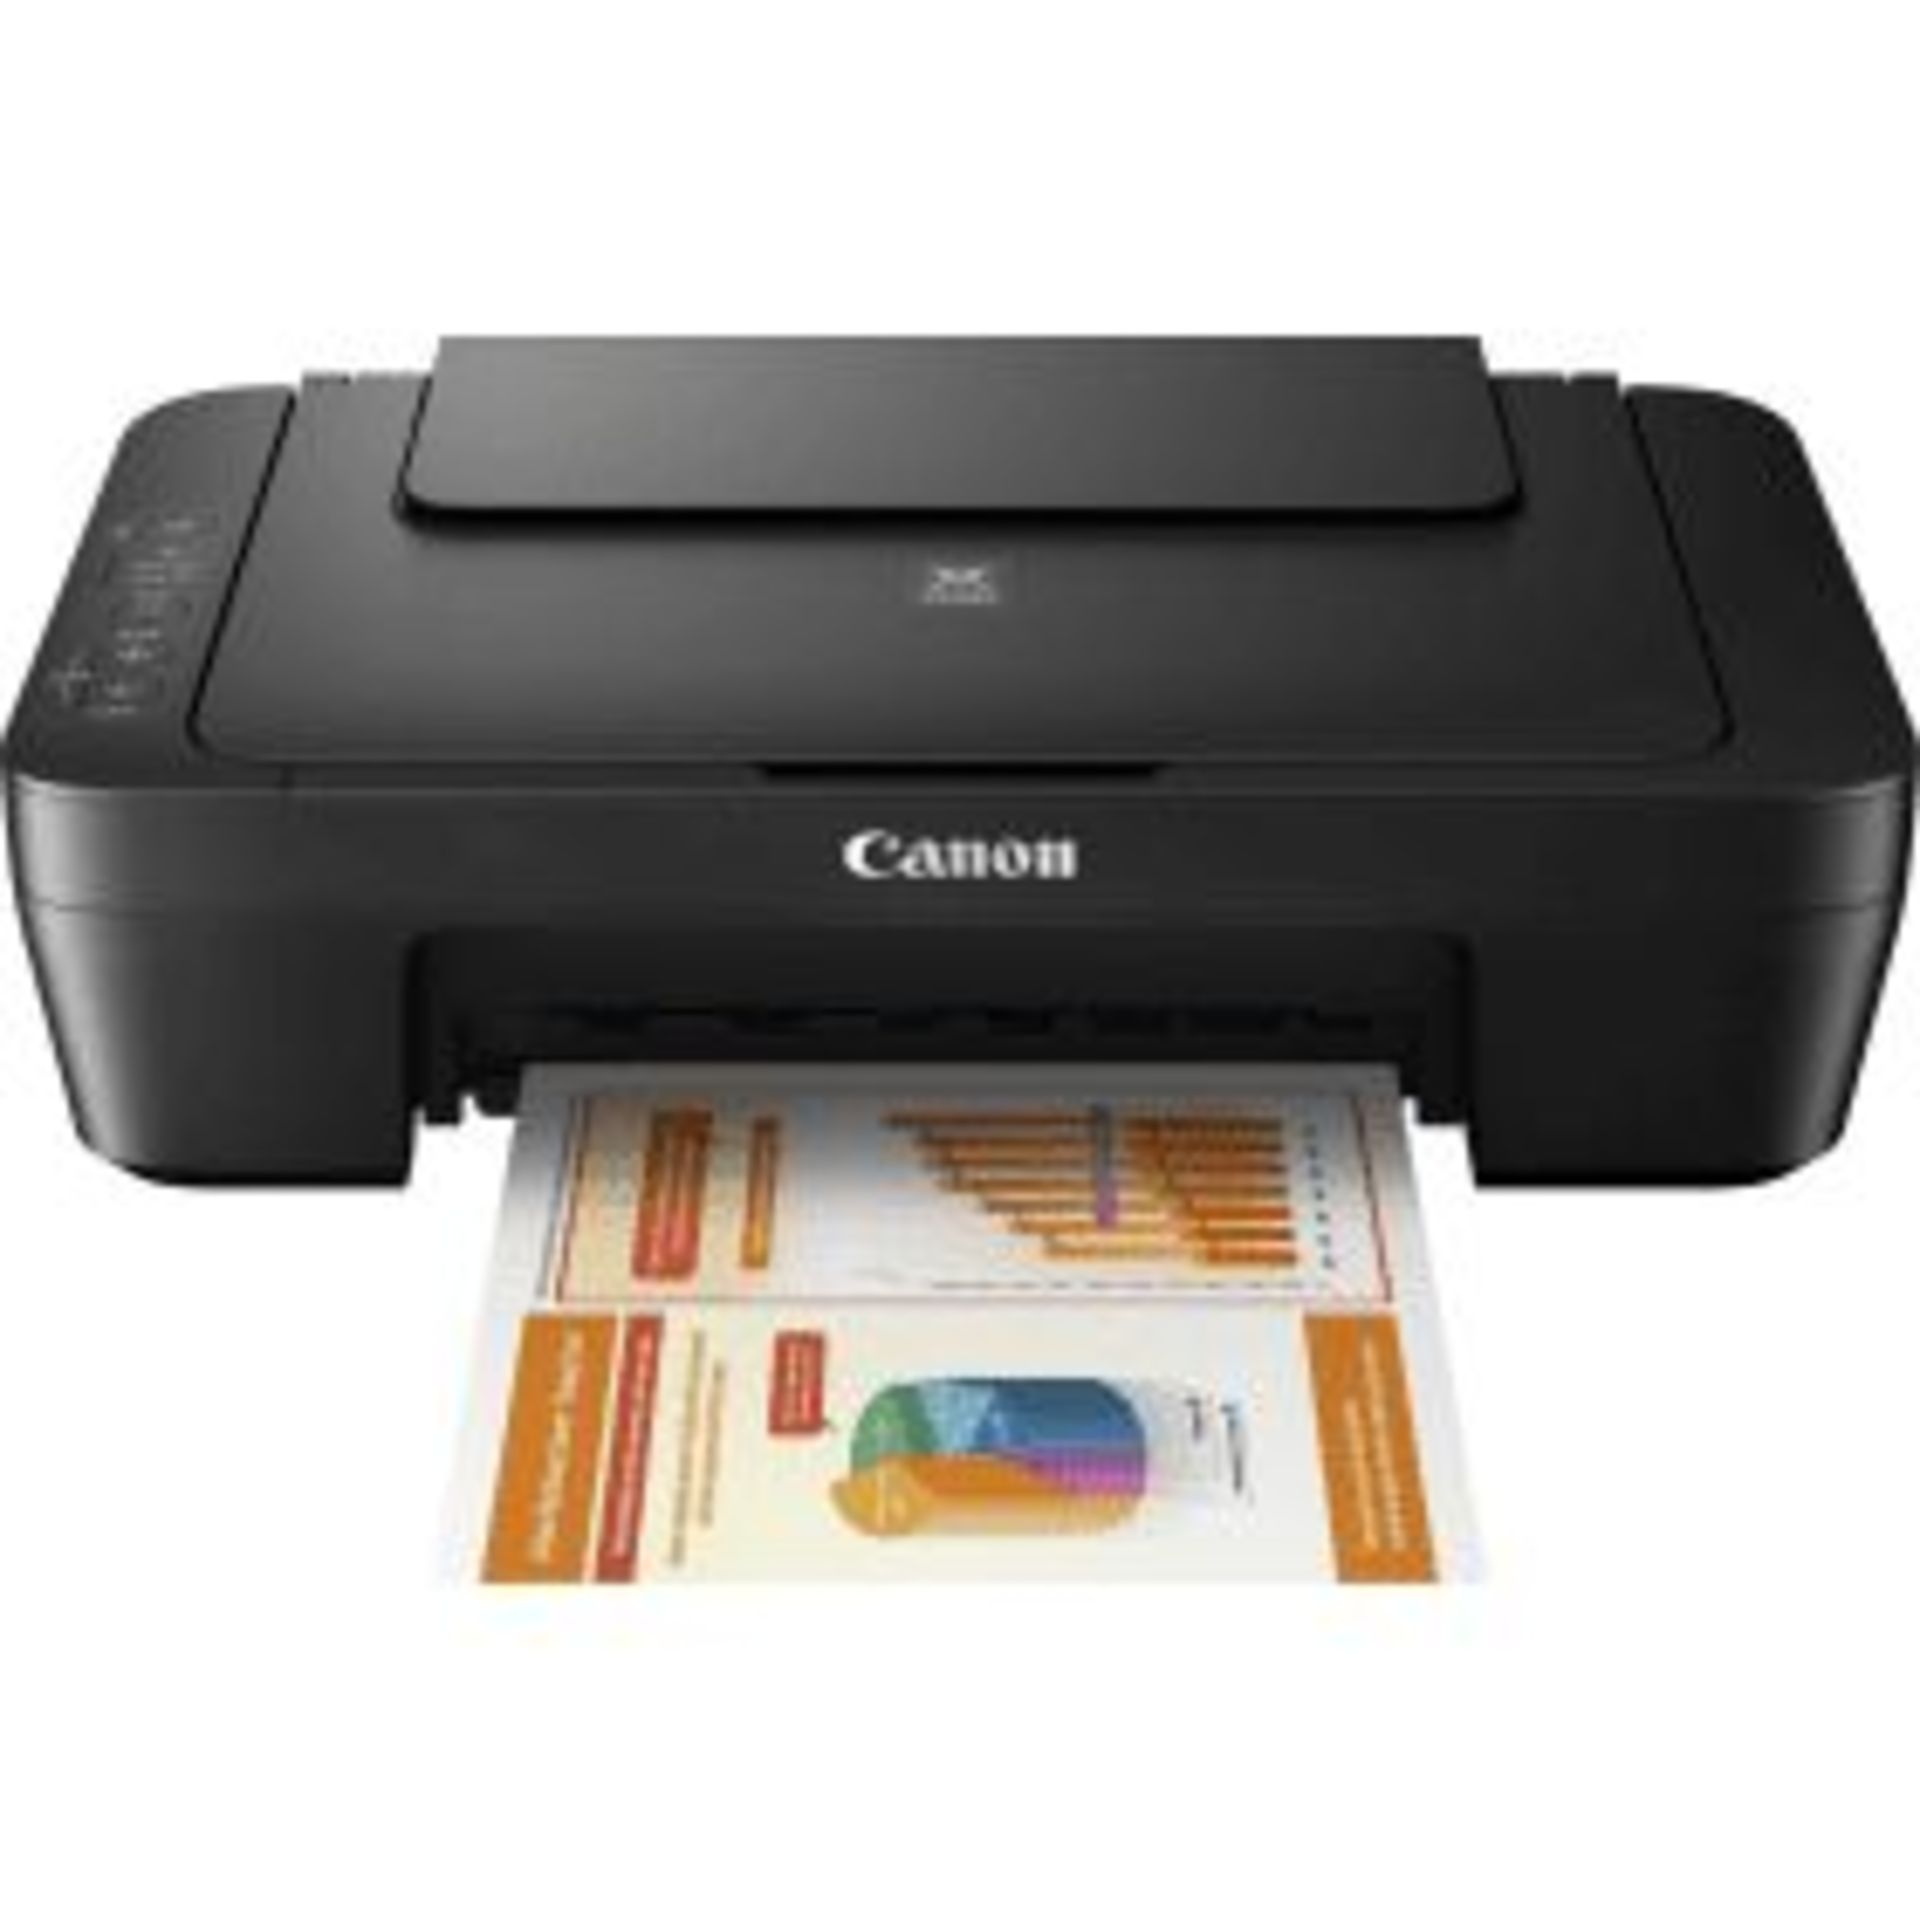 Canon PIXMA MG2550S All-in-One Printer. - P4. A sleek-looking model which can also scan and copy,